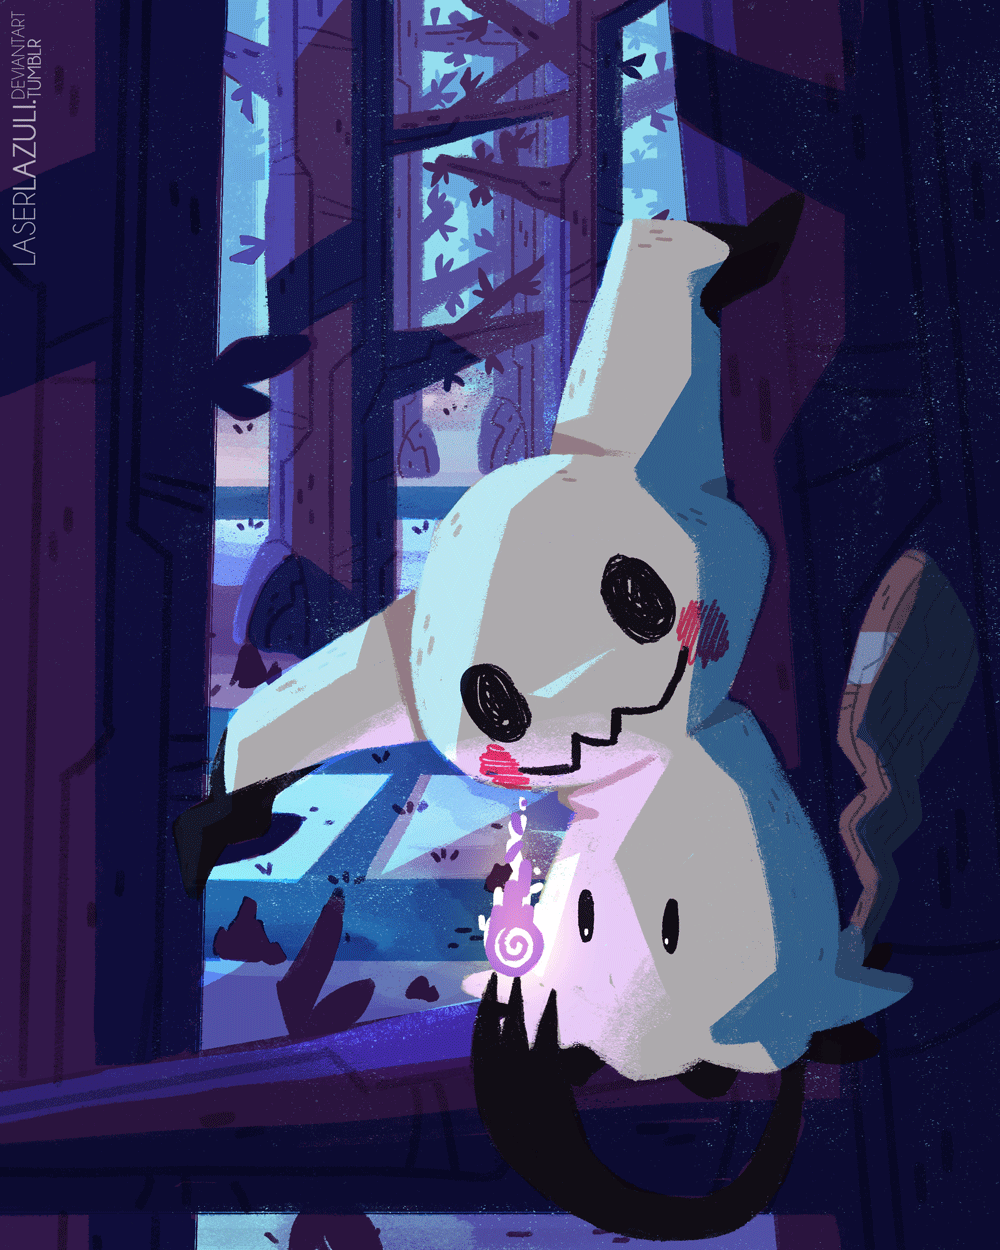 Mimikyu in the woods